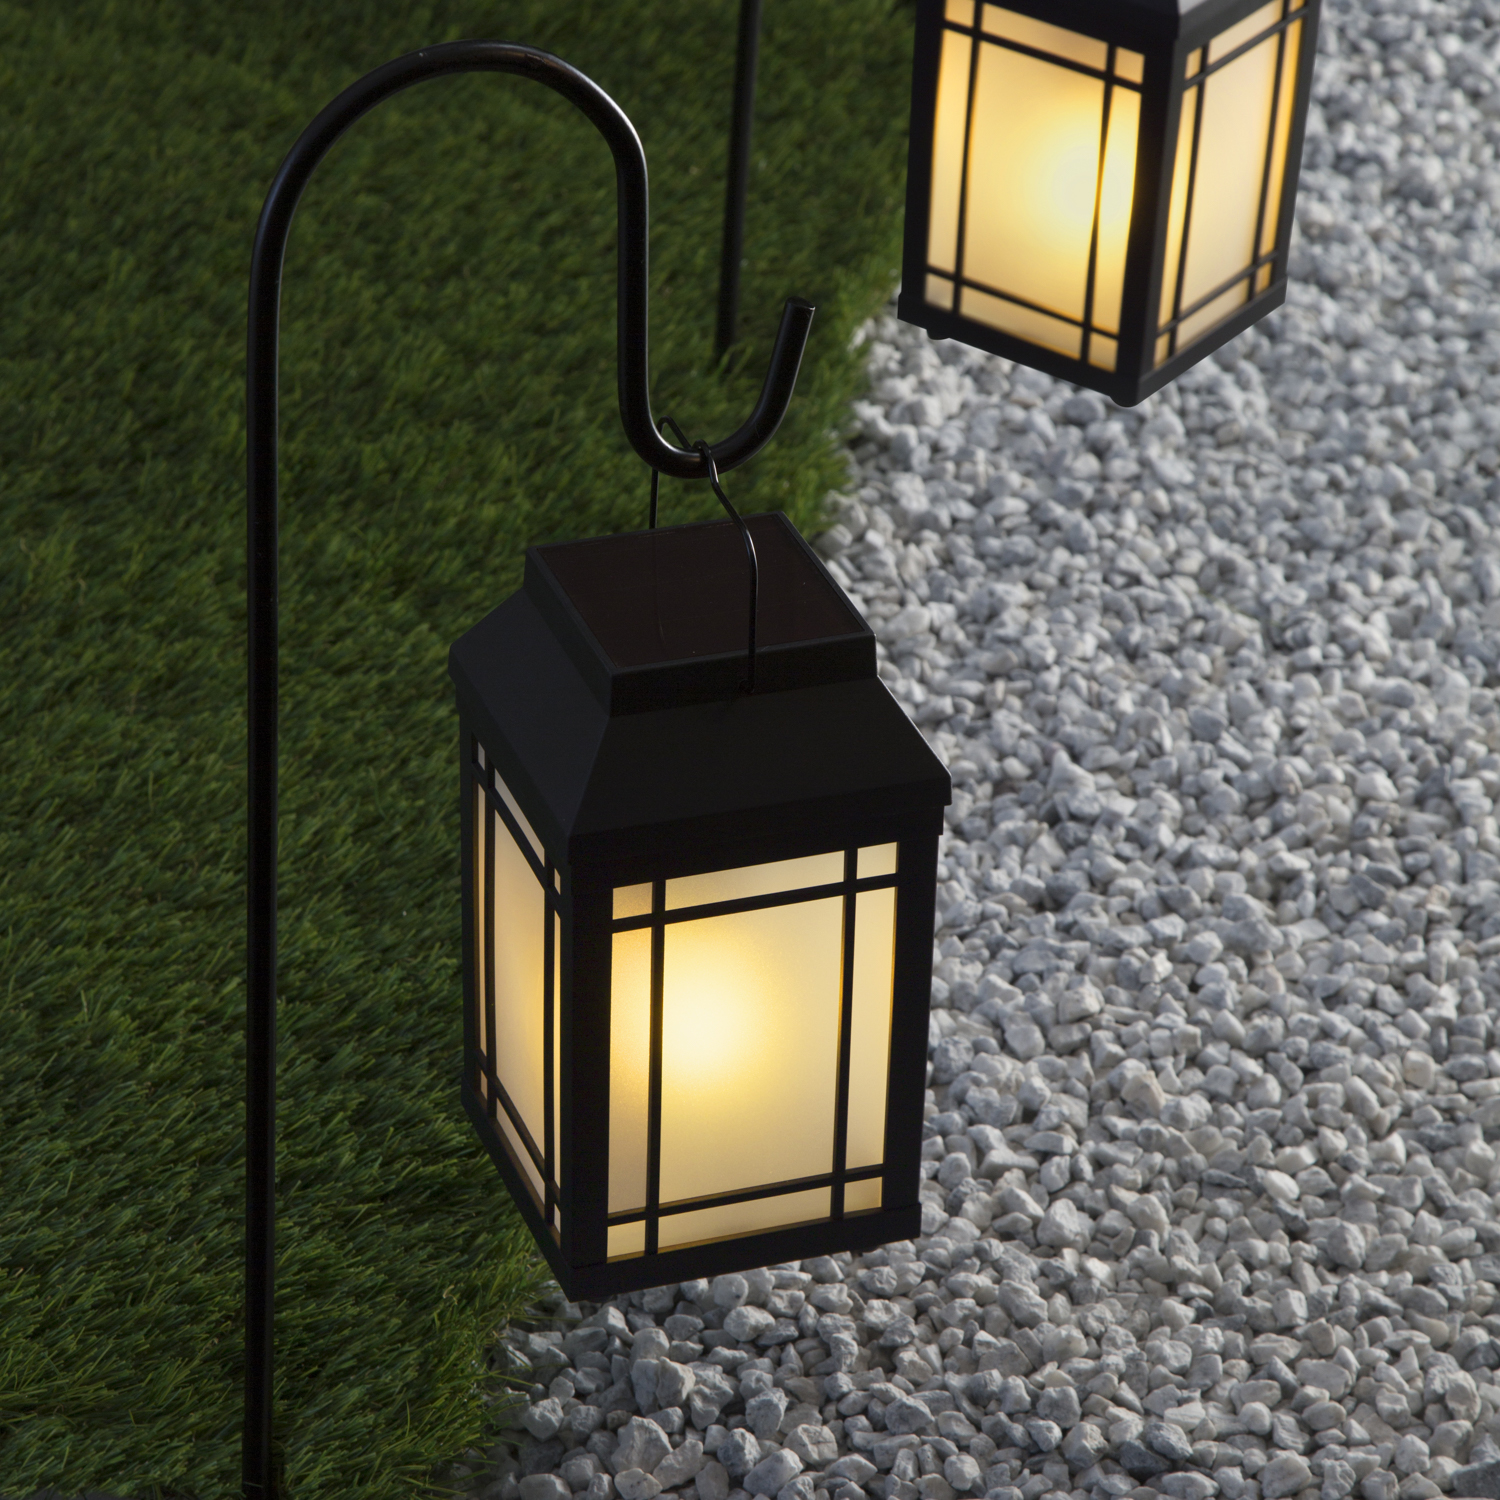 Ignis Solar Lanterns Set Of 2, What Are The Best Outdoor Solar Lanterns